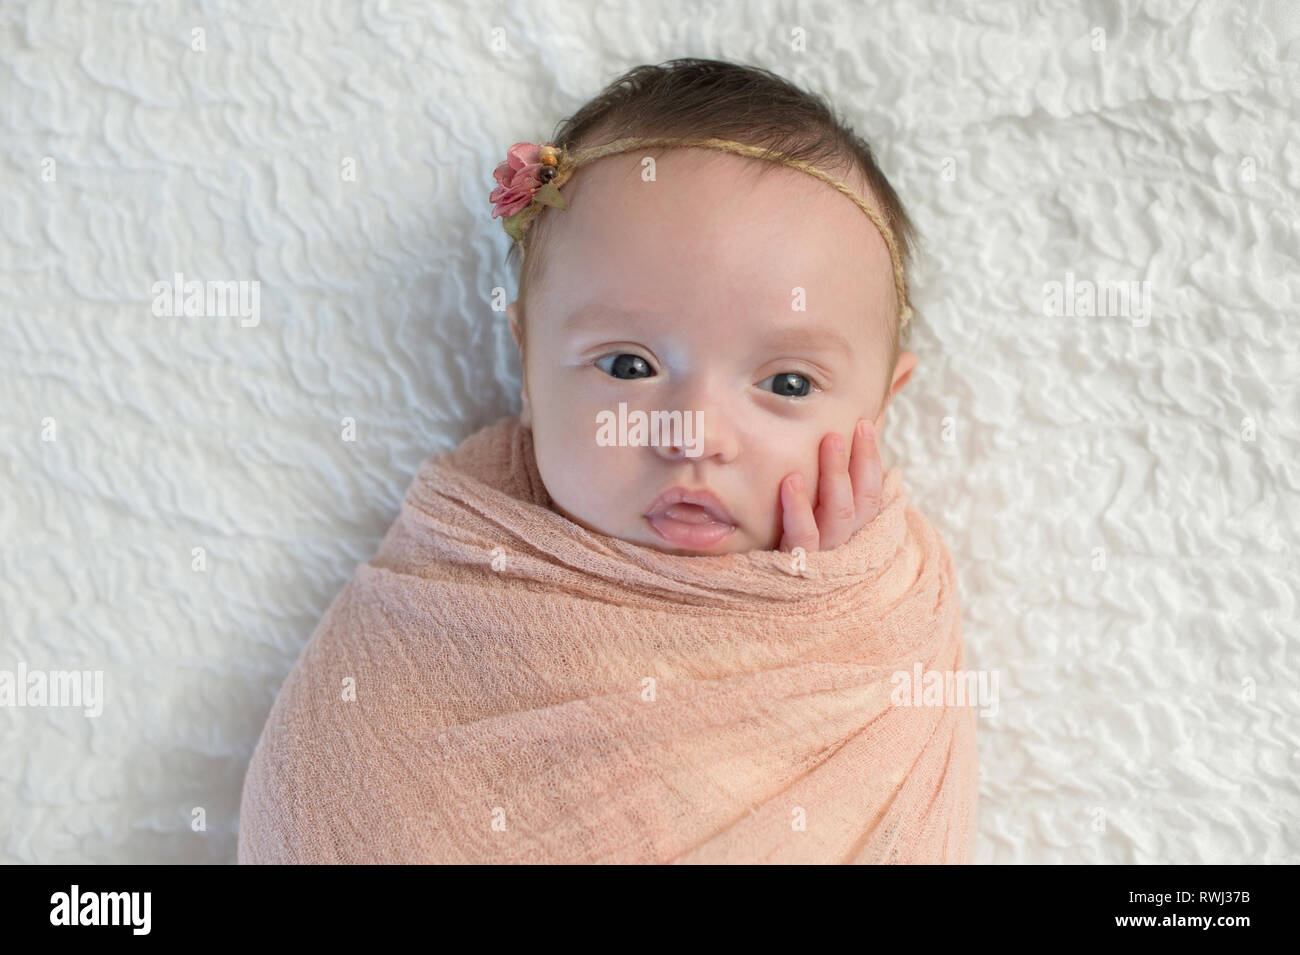 Alert month old baby girl swaddled in a peach colored wrap. Shot in the studio on a white blanket. Stock Photo